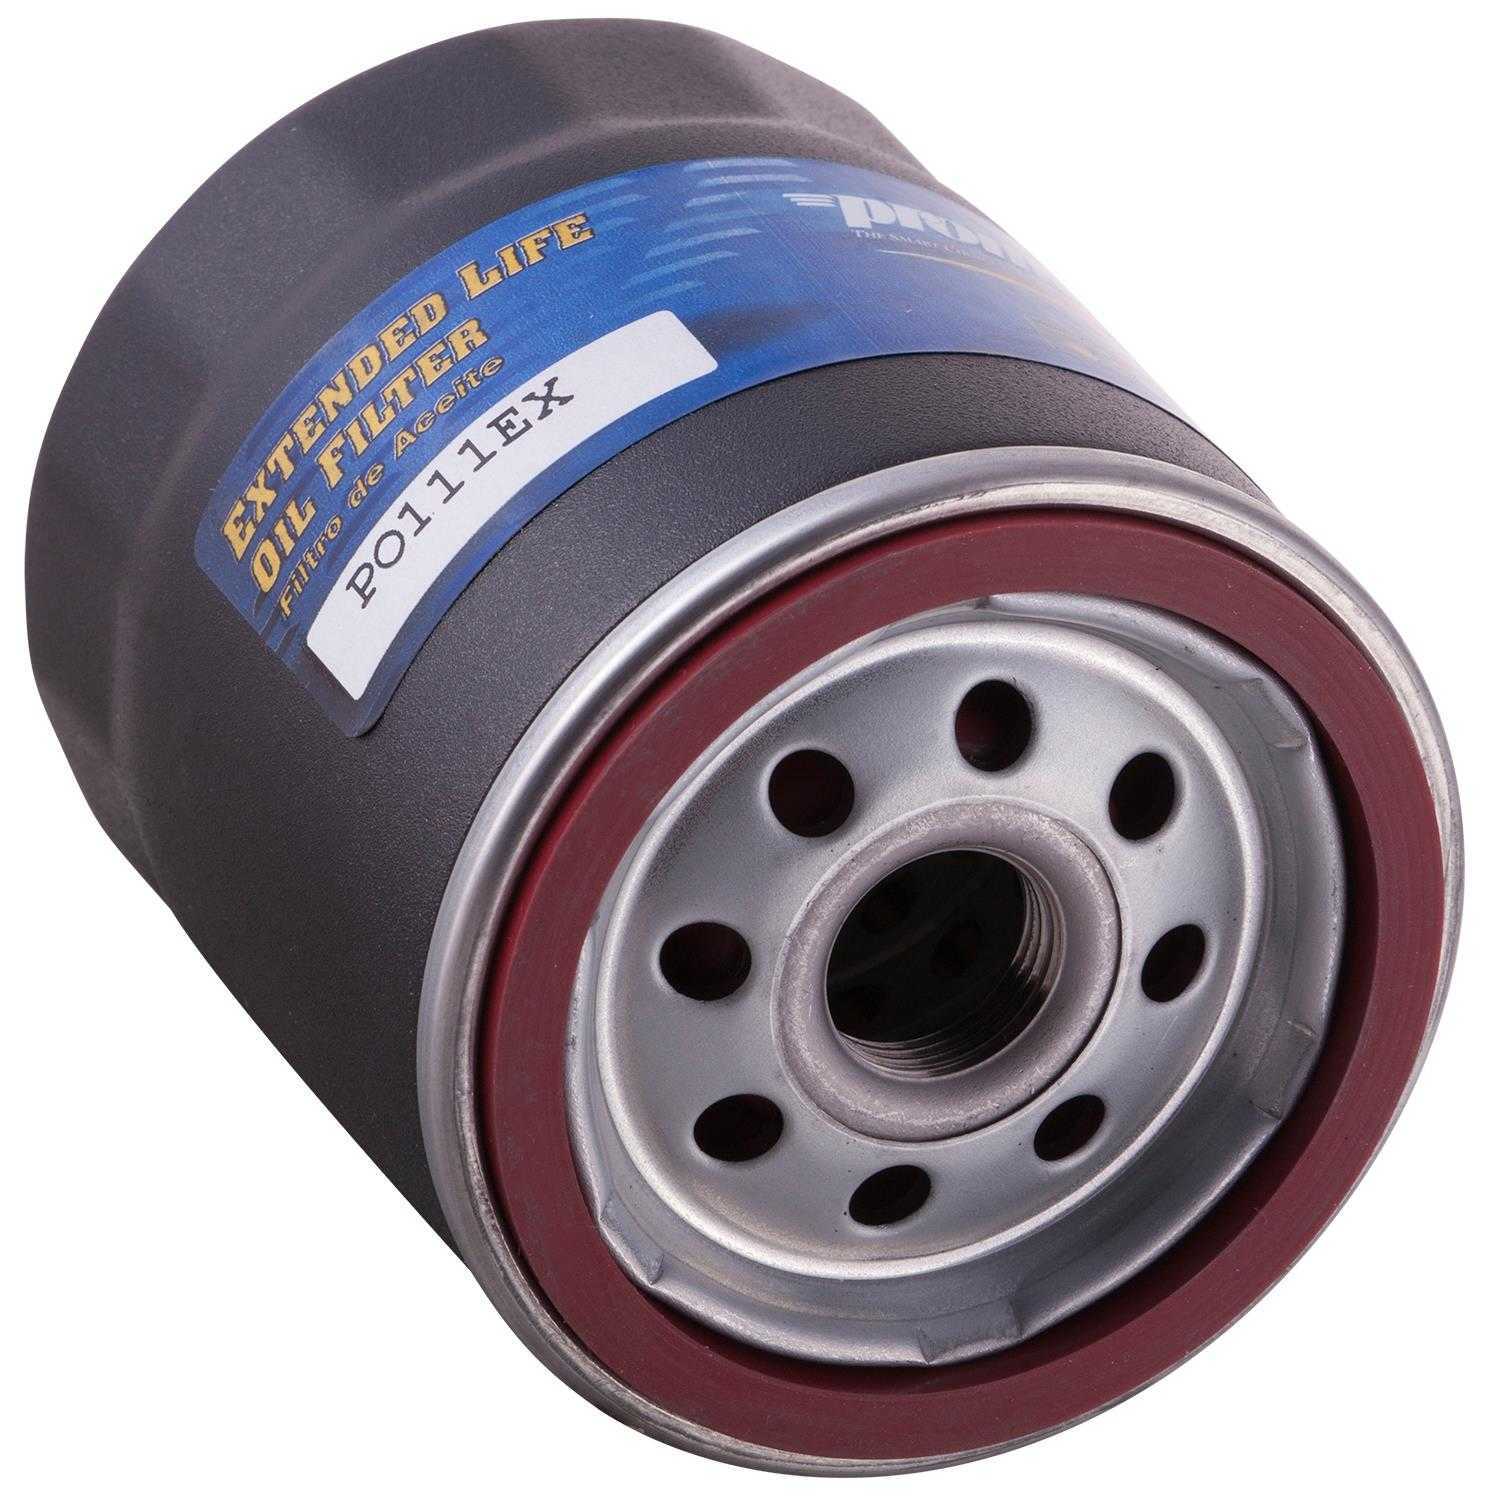 PRONTO/ID USA - Extended Life Oil Filter - PNP PO111EX